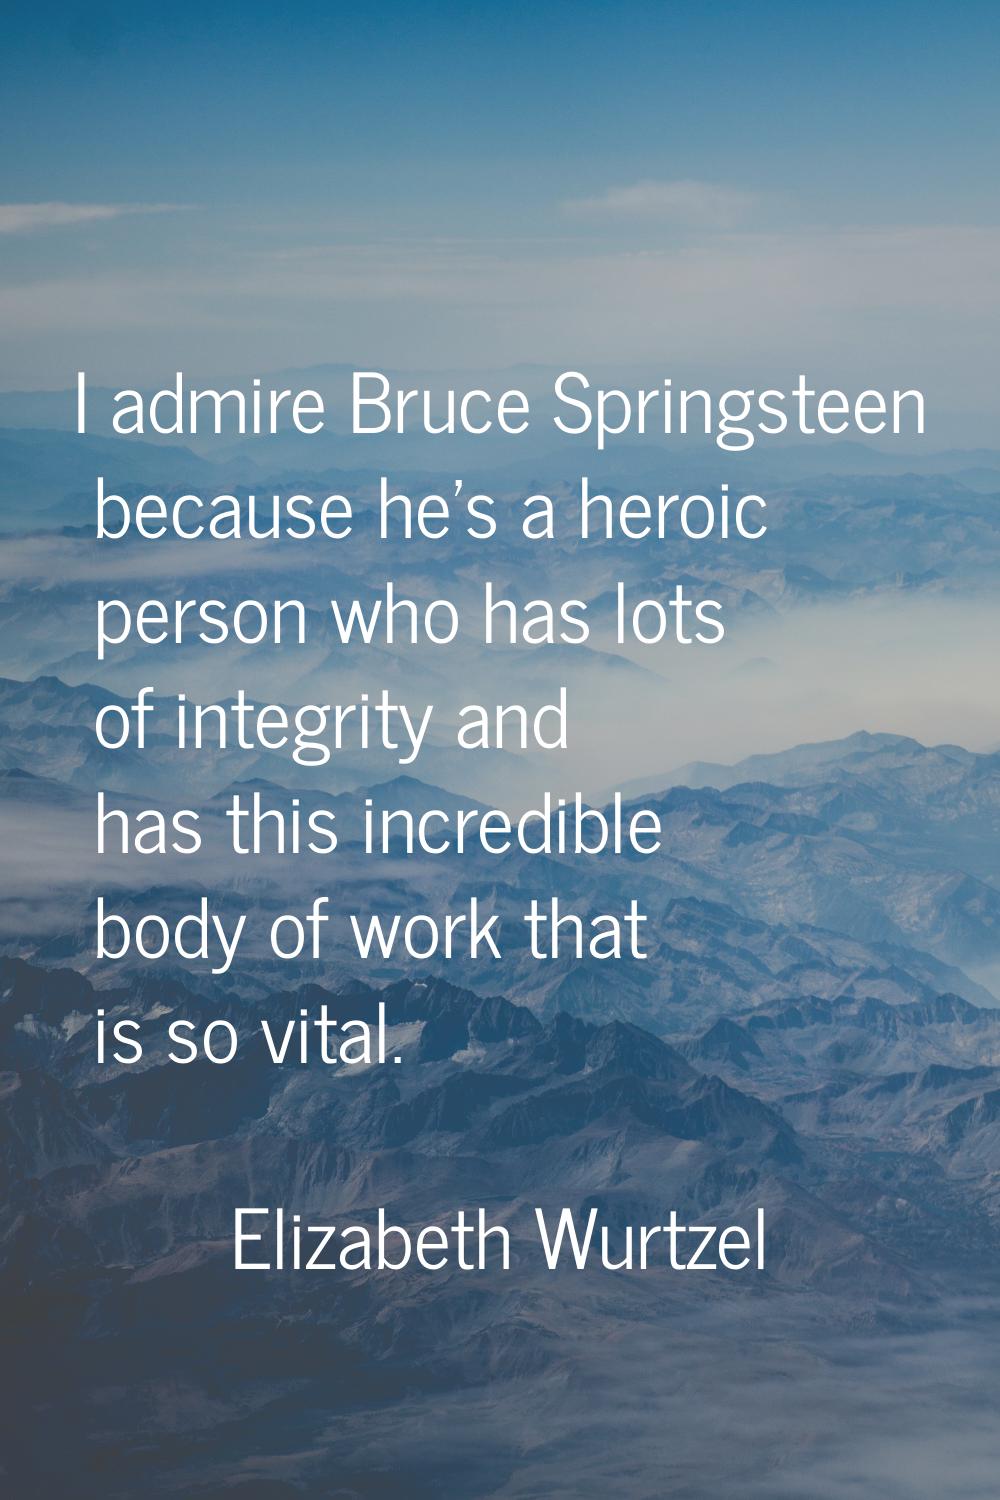 I admire Bruce Springsteen because he's a heroic person who has lots of integrity and has this incr